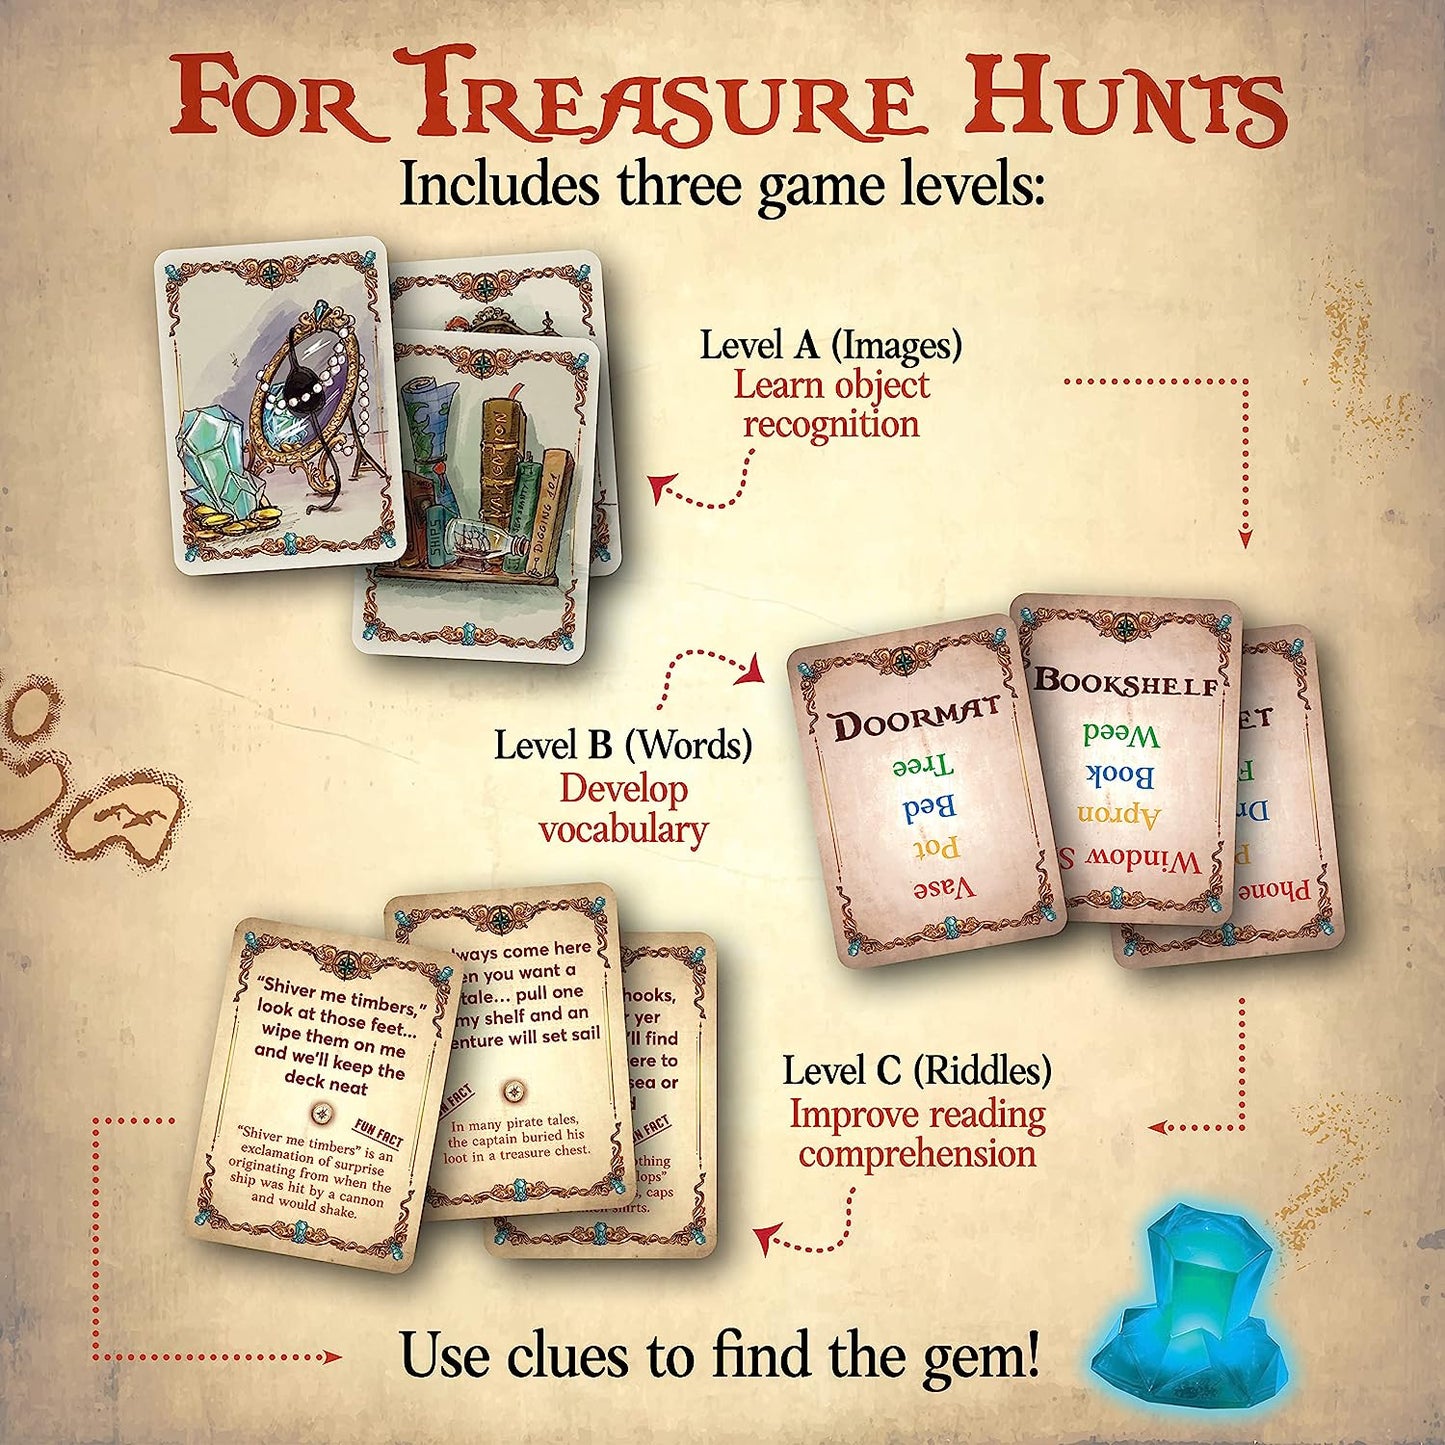 Word Treasures – Pirate Toys and Scavenger Hunt Games for Kids | Ages 4-8+, 1-4 players | Use for Sight Word Games, a Treasure Hunt, Memory Games or Puzzles for Kids Ages 4-8 | A Replayable Adventure!